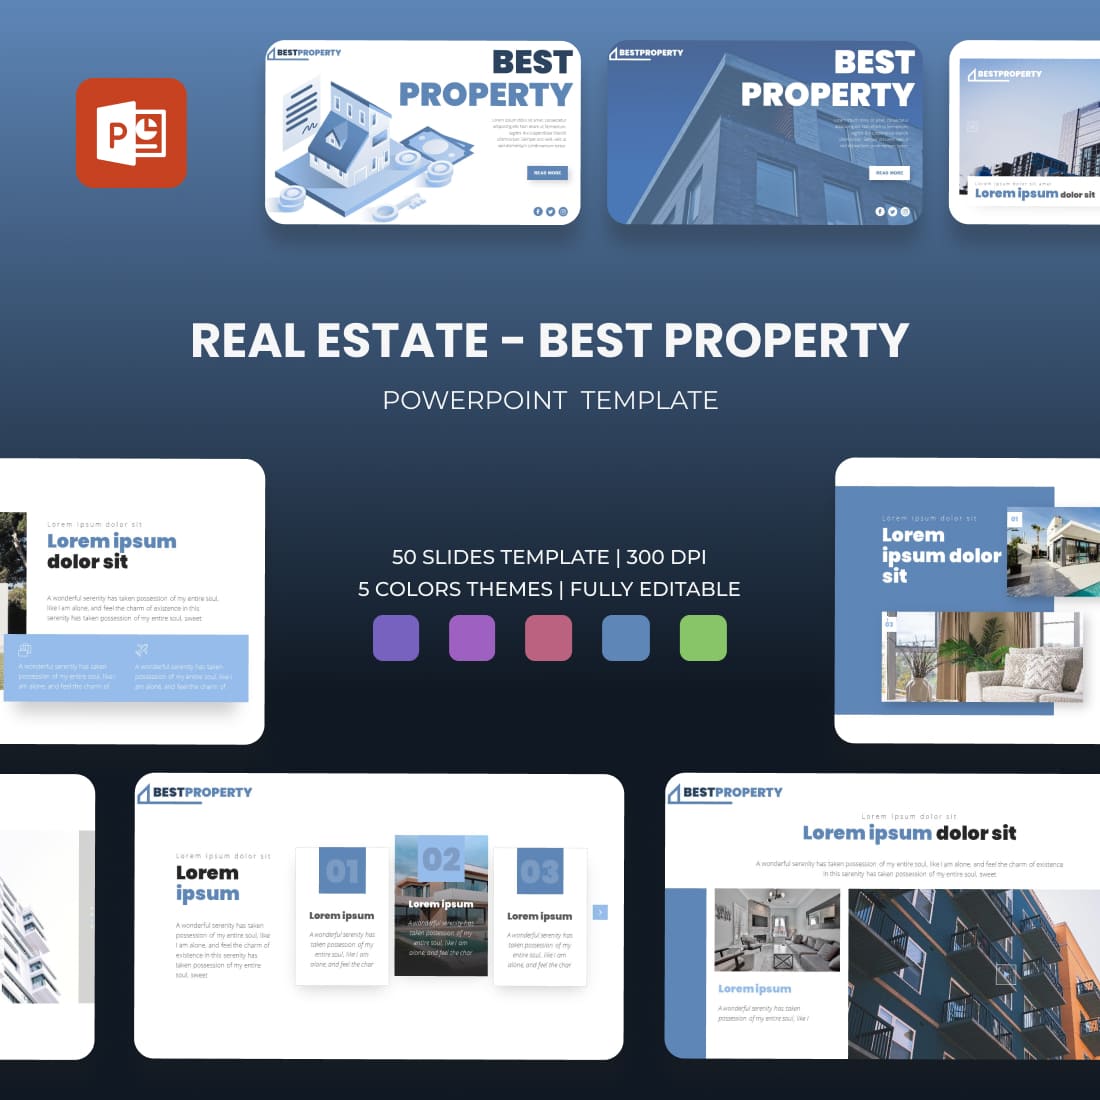 Best Property Real Estate Powerpoint Template.